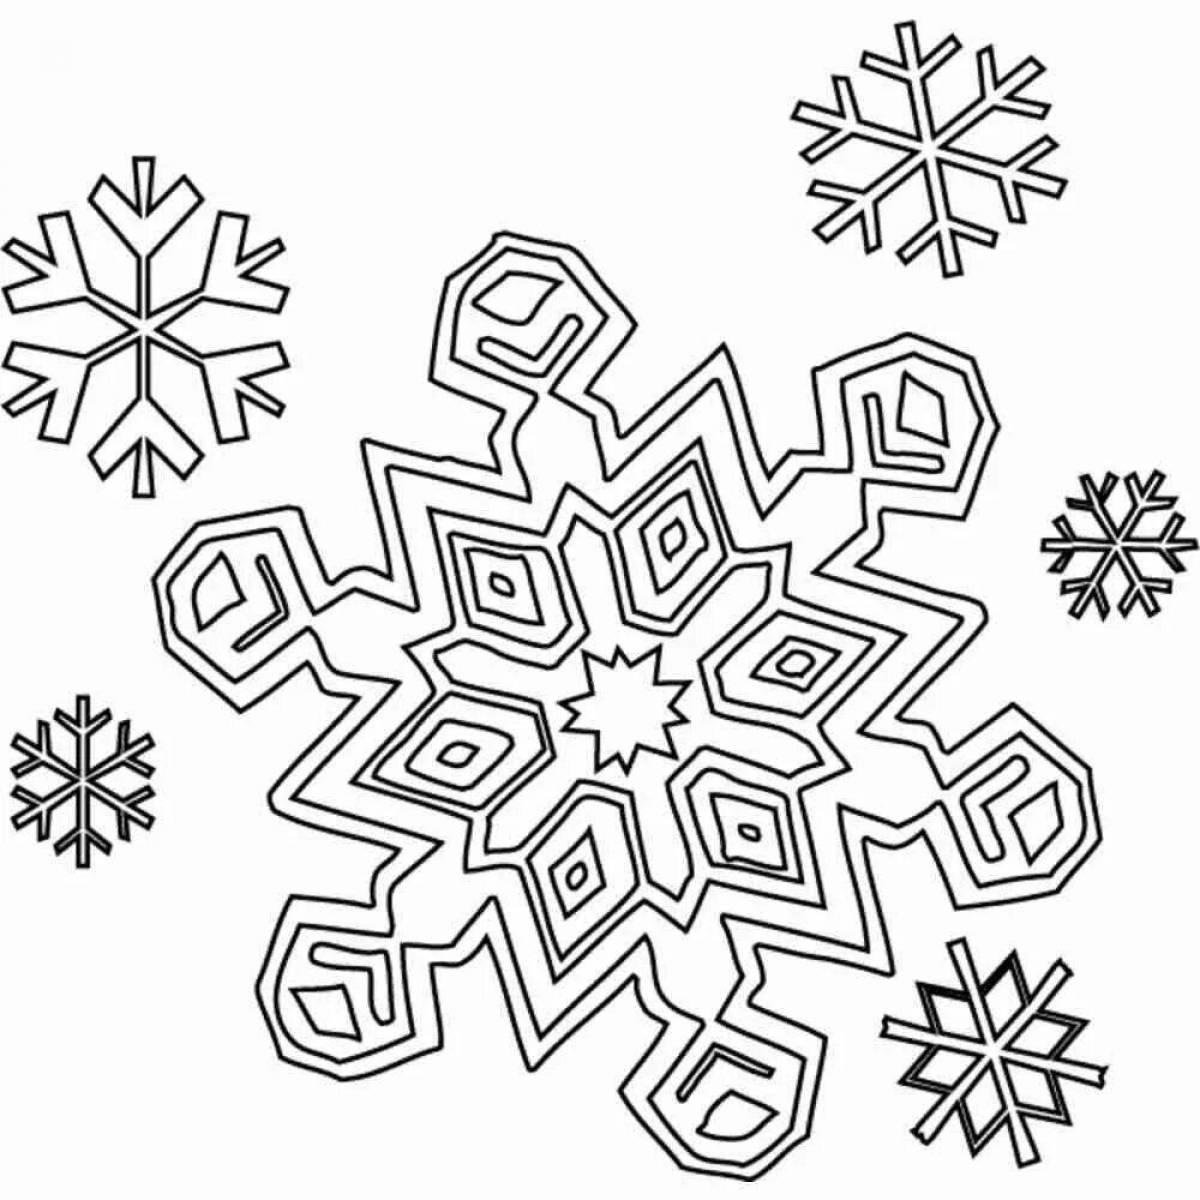 Intricate frost pattern coloring pages